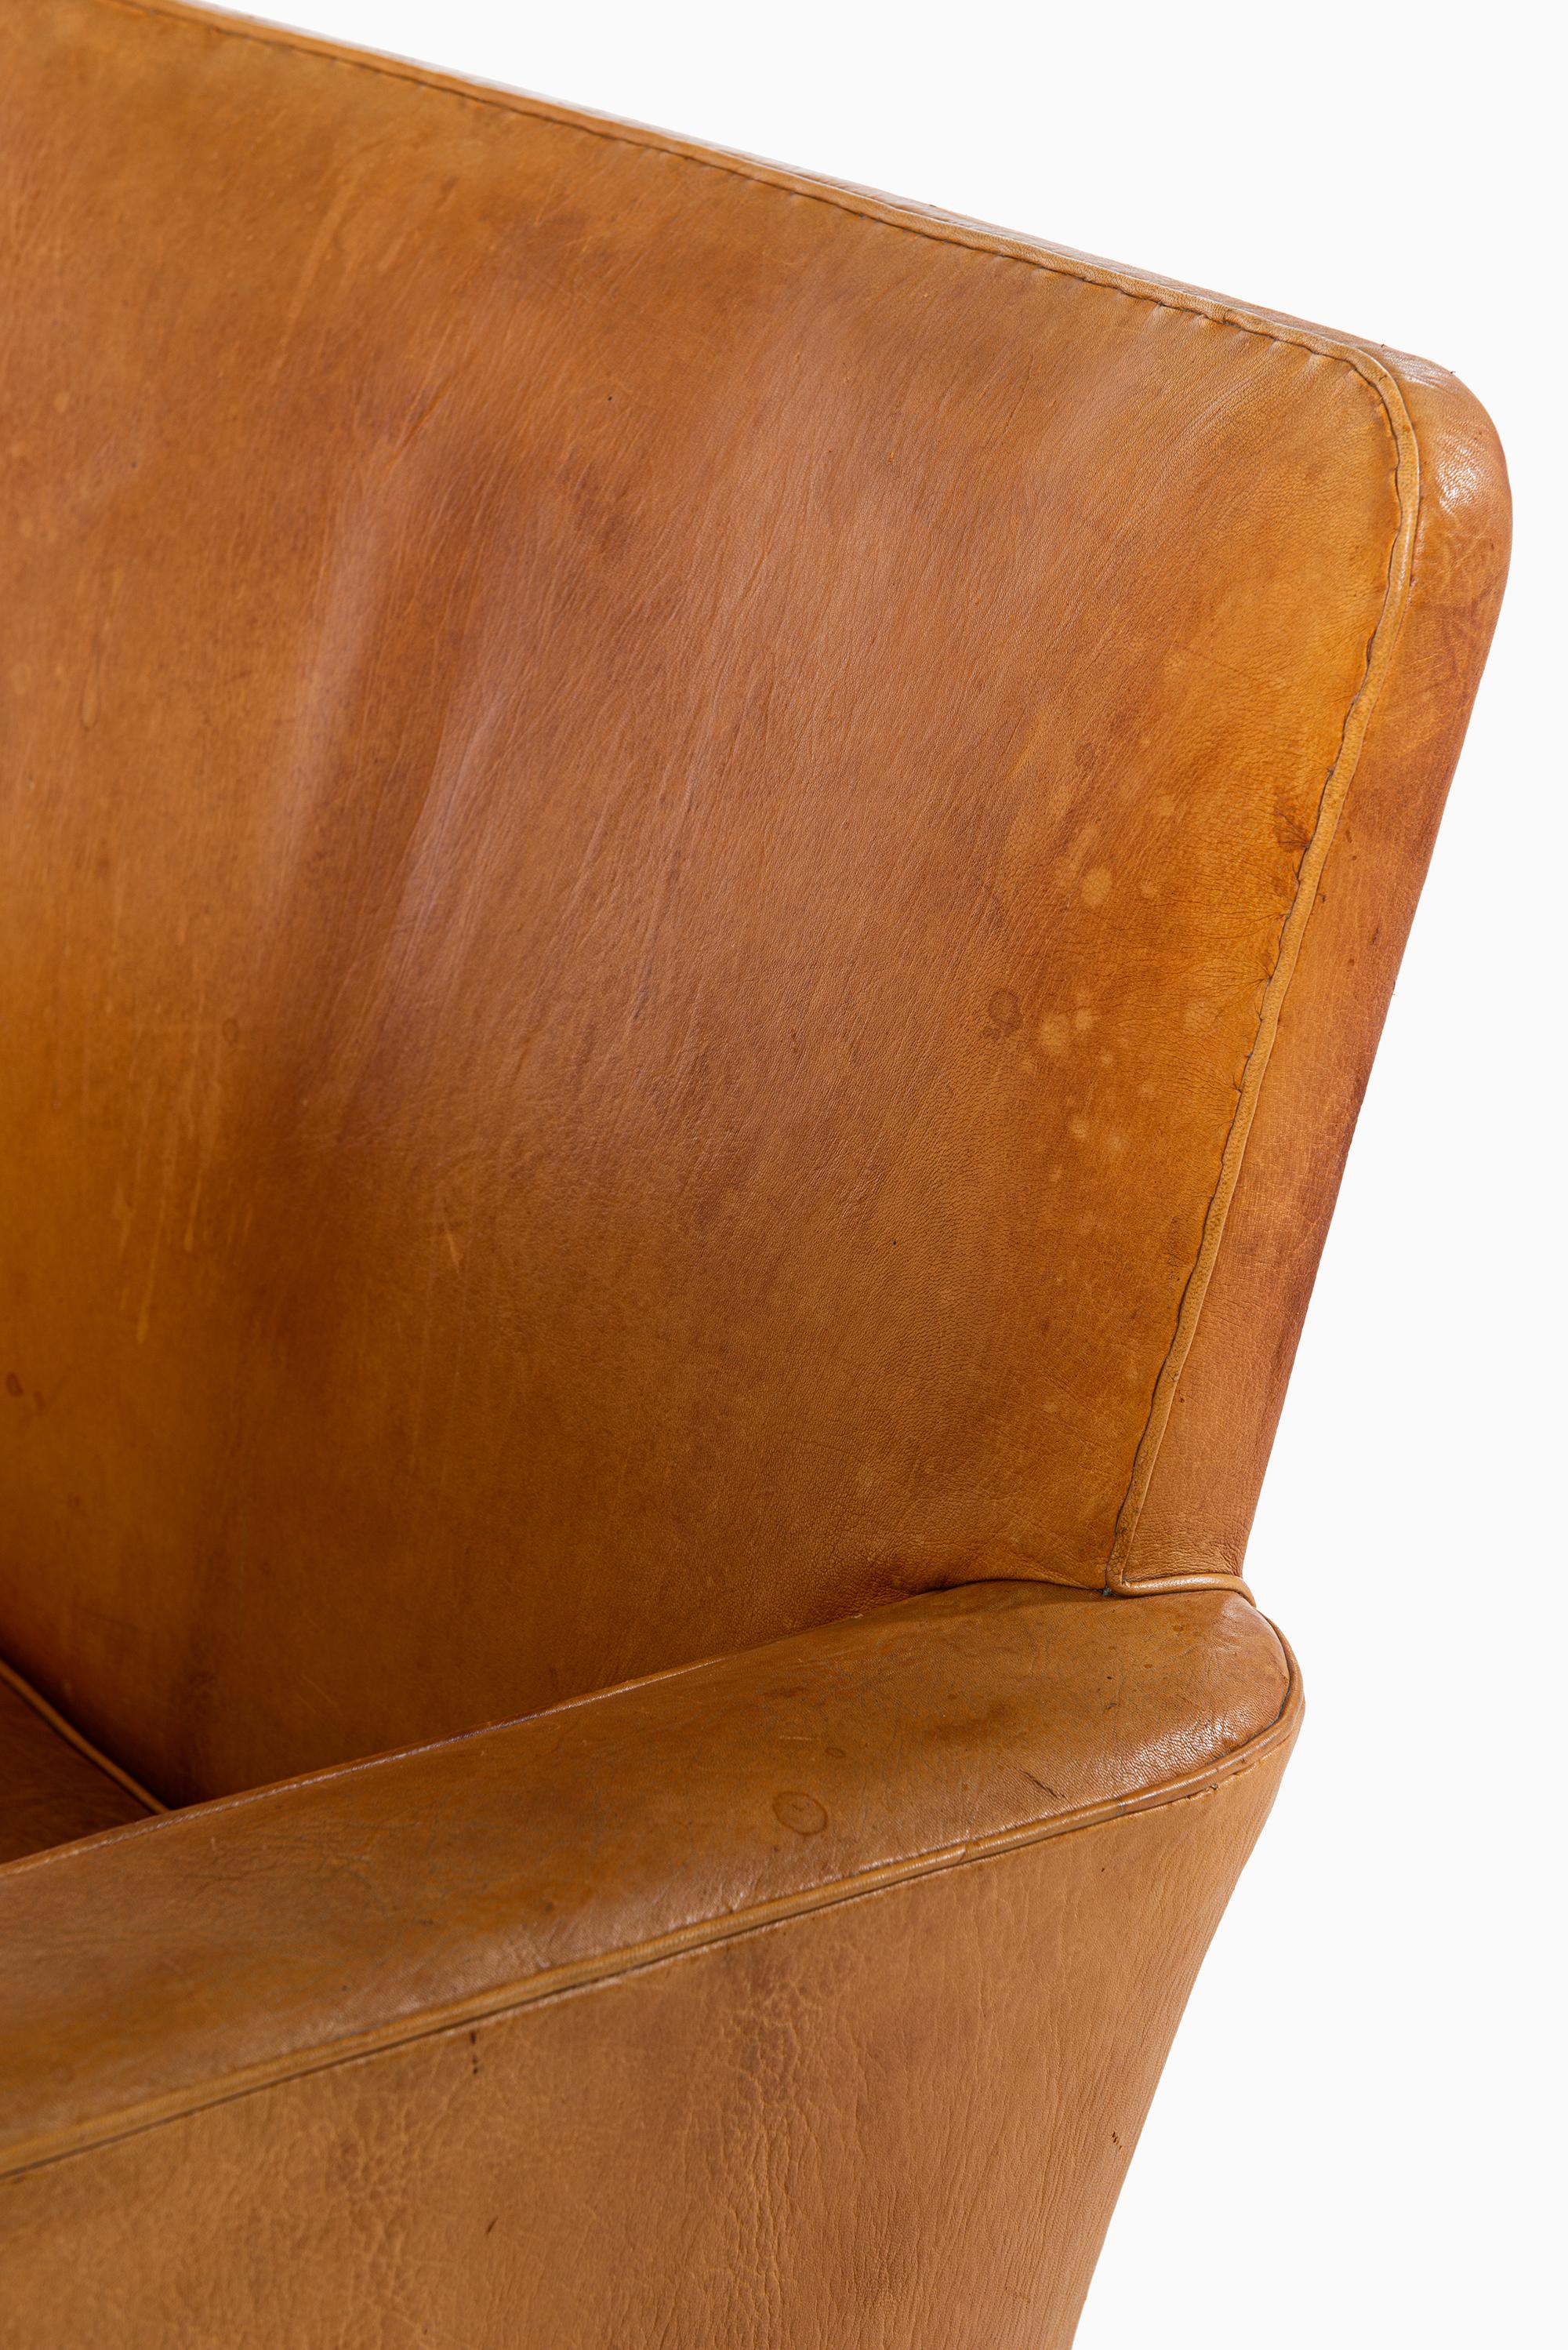 Leather Kaare Klint Easy Chairs Model 5313 Produced by Rud. Rasmussen in Denmark For Sale